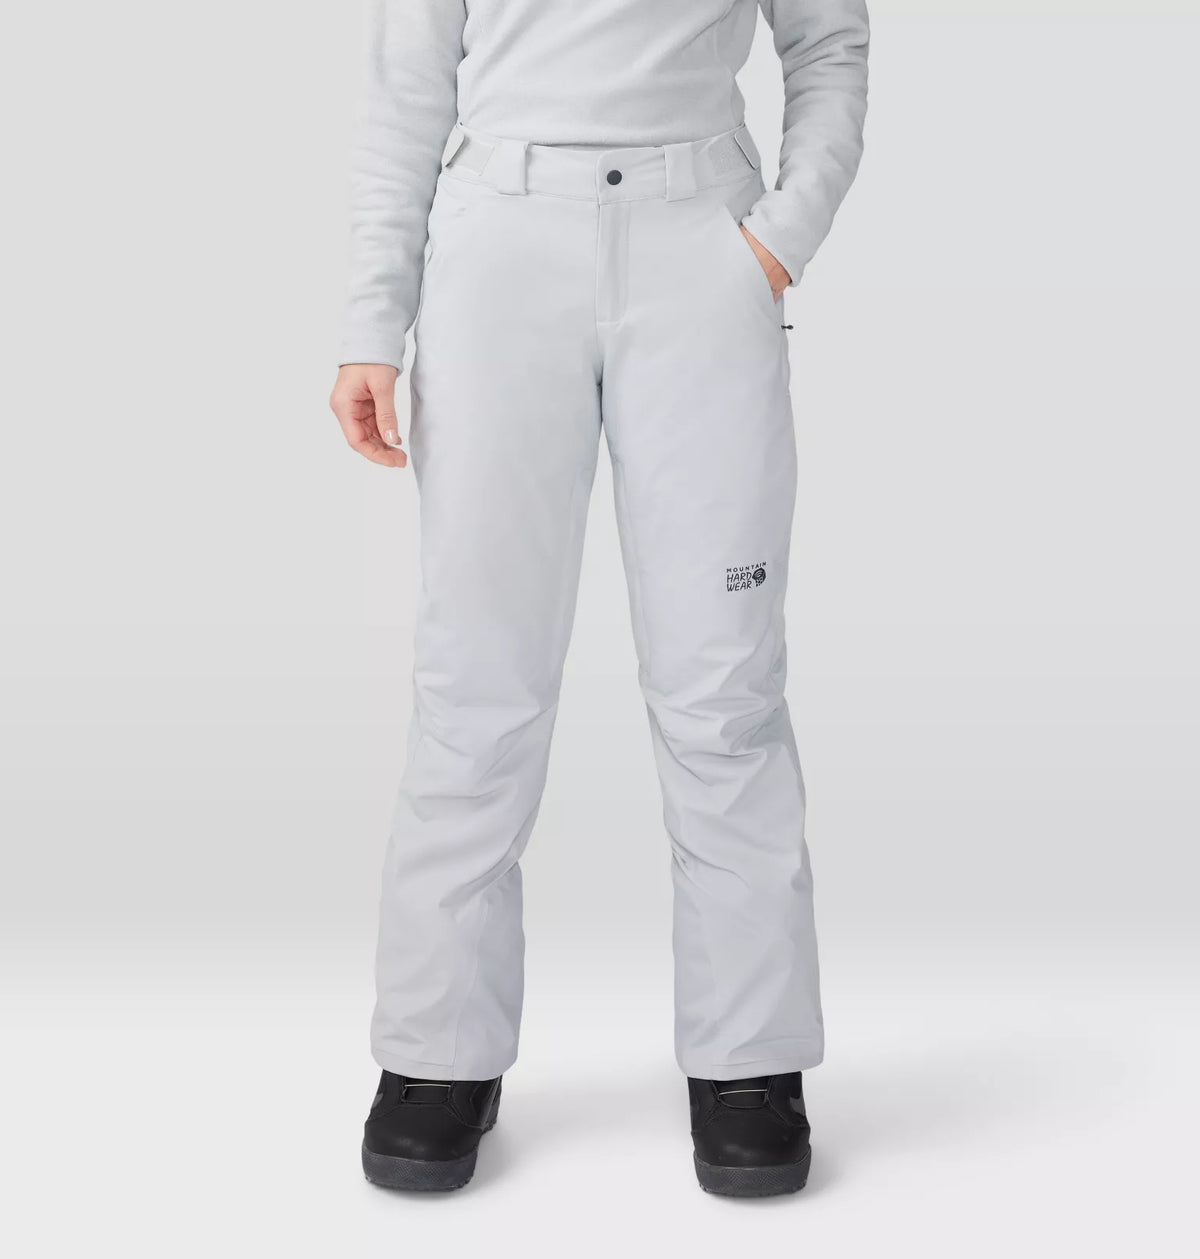 MHW Women's Firefall/2 Insulated Pant